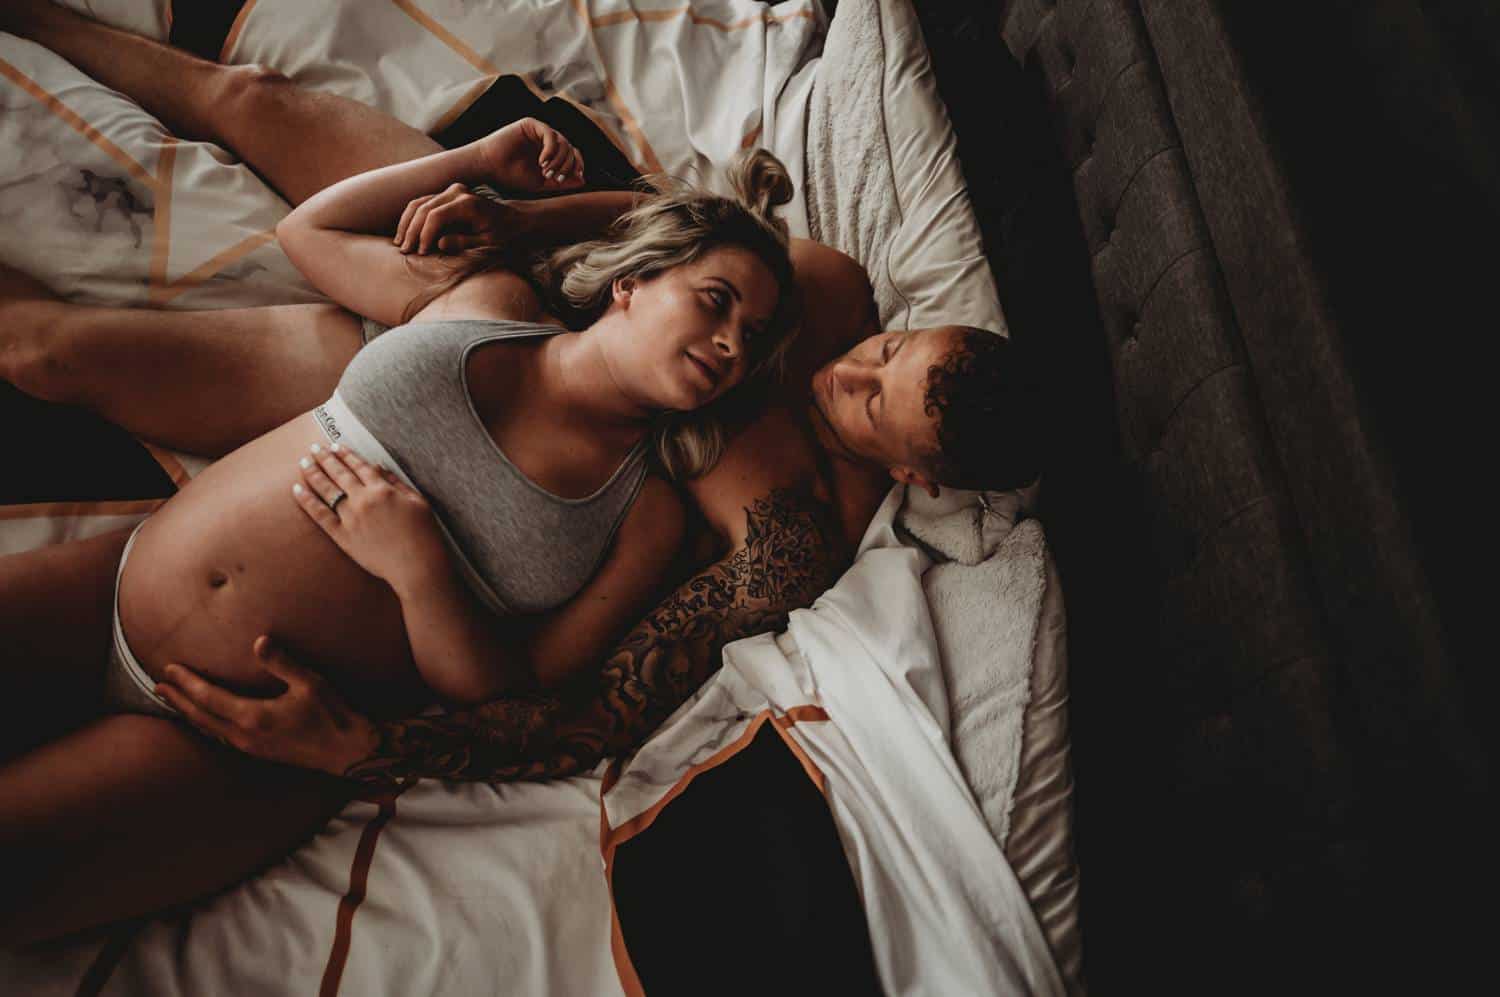 A couple lies on their bed in a dimly lit room. They are photographed from above, with the camera looking down on them. The woman lounged against her partner's chest, with her hand draped across her pregnant belly. She's wearing a gray Calvin Klein underwear set, and her partner's tattooed arms are wrapped around her as they look at one another.